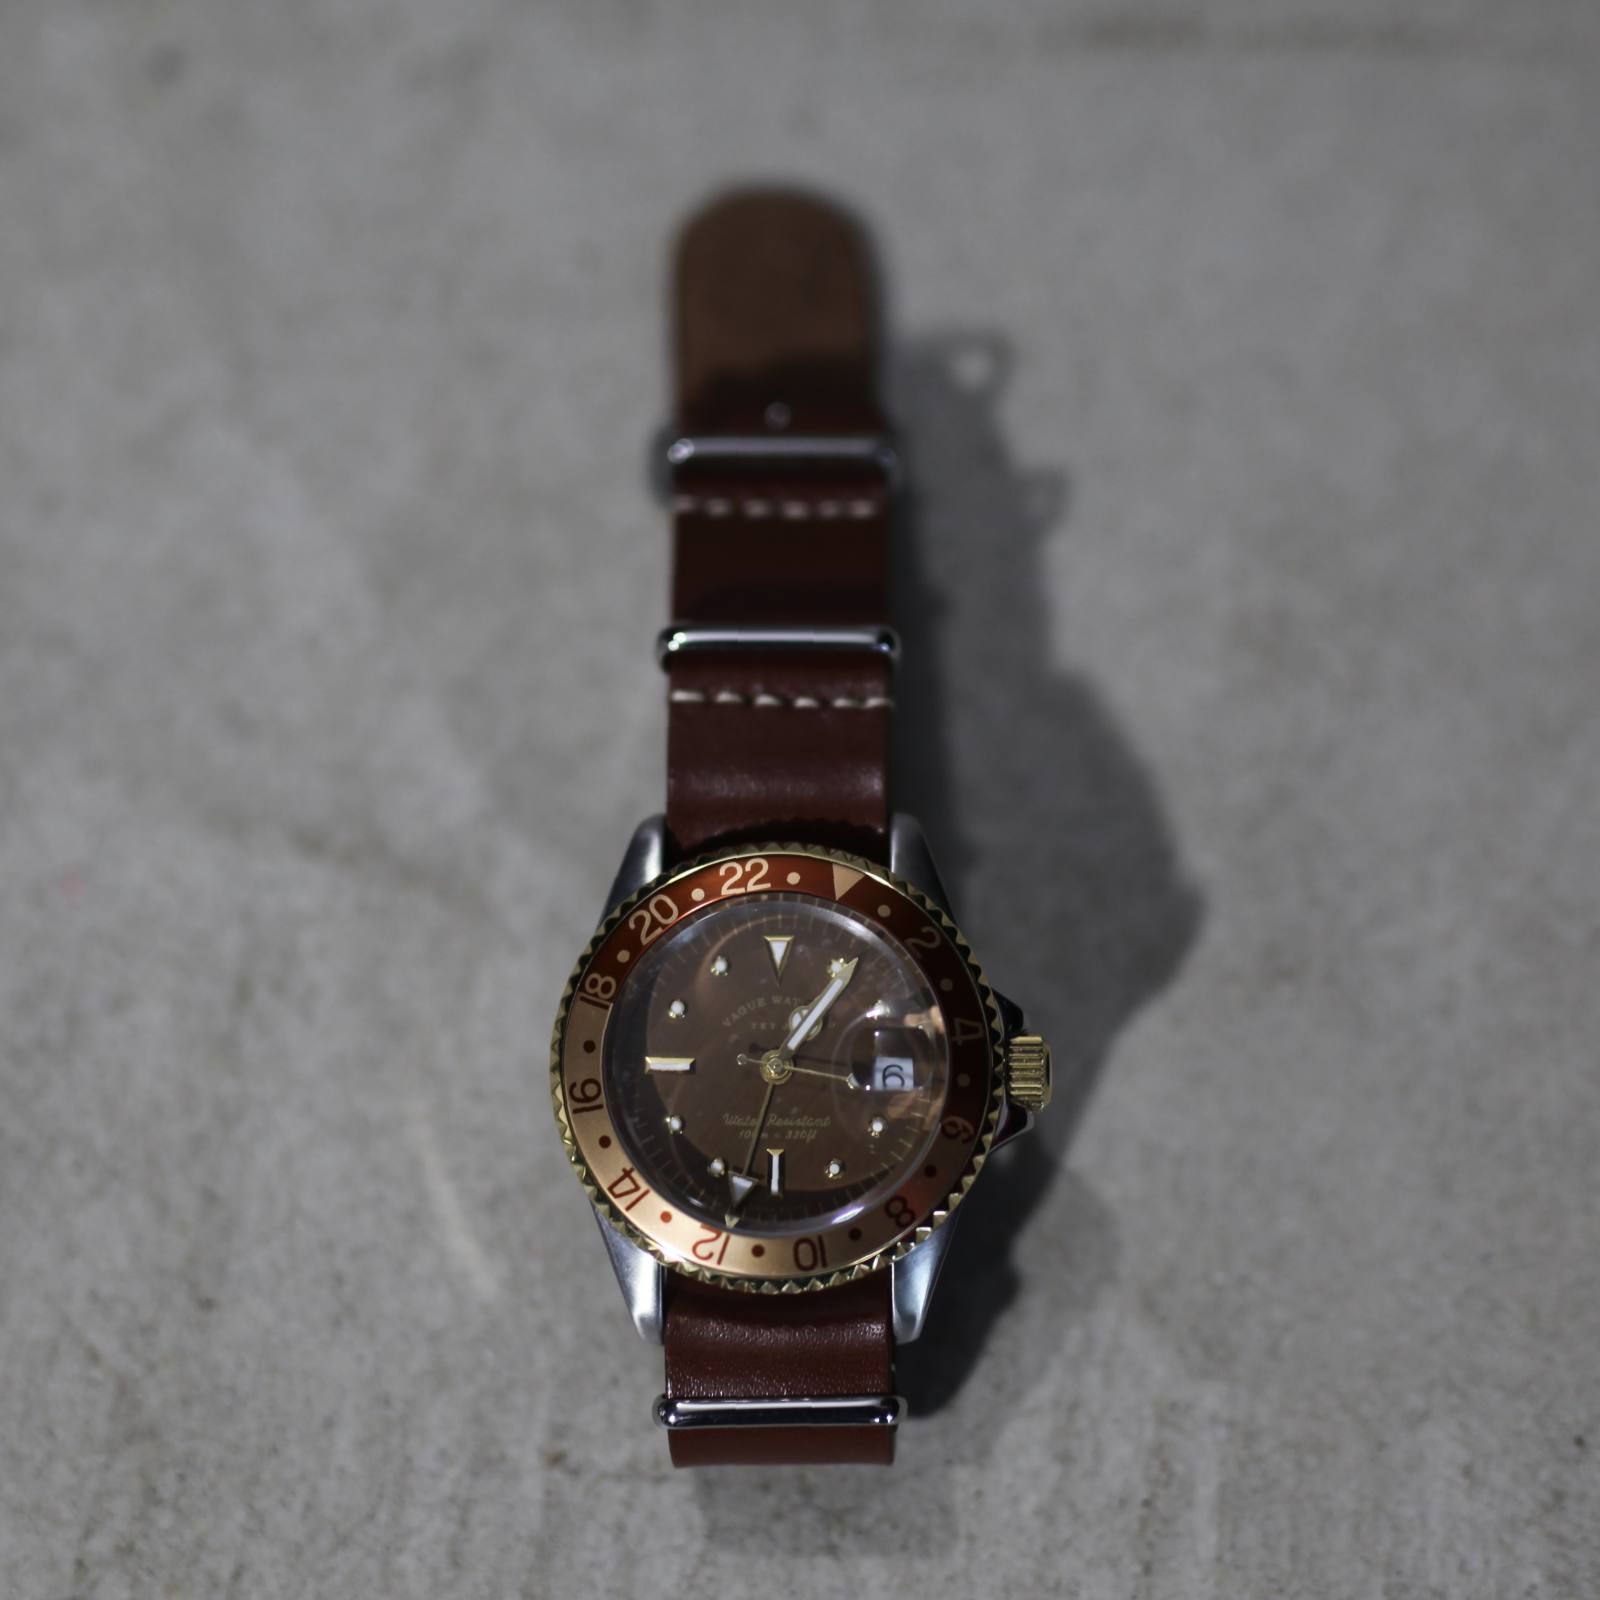 VAGUE WATCH CO. - 【お取り寄せ注文可能】BRWN GMT | ACRMTSM ONLINE